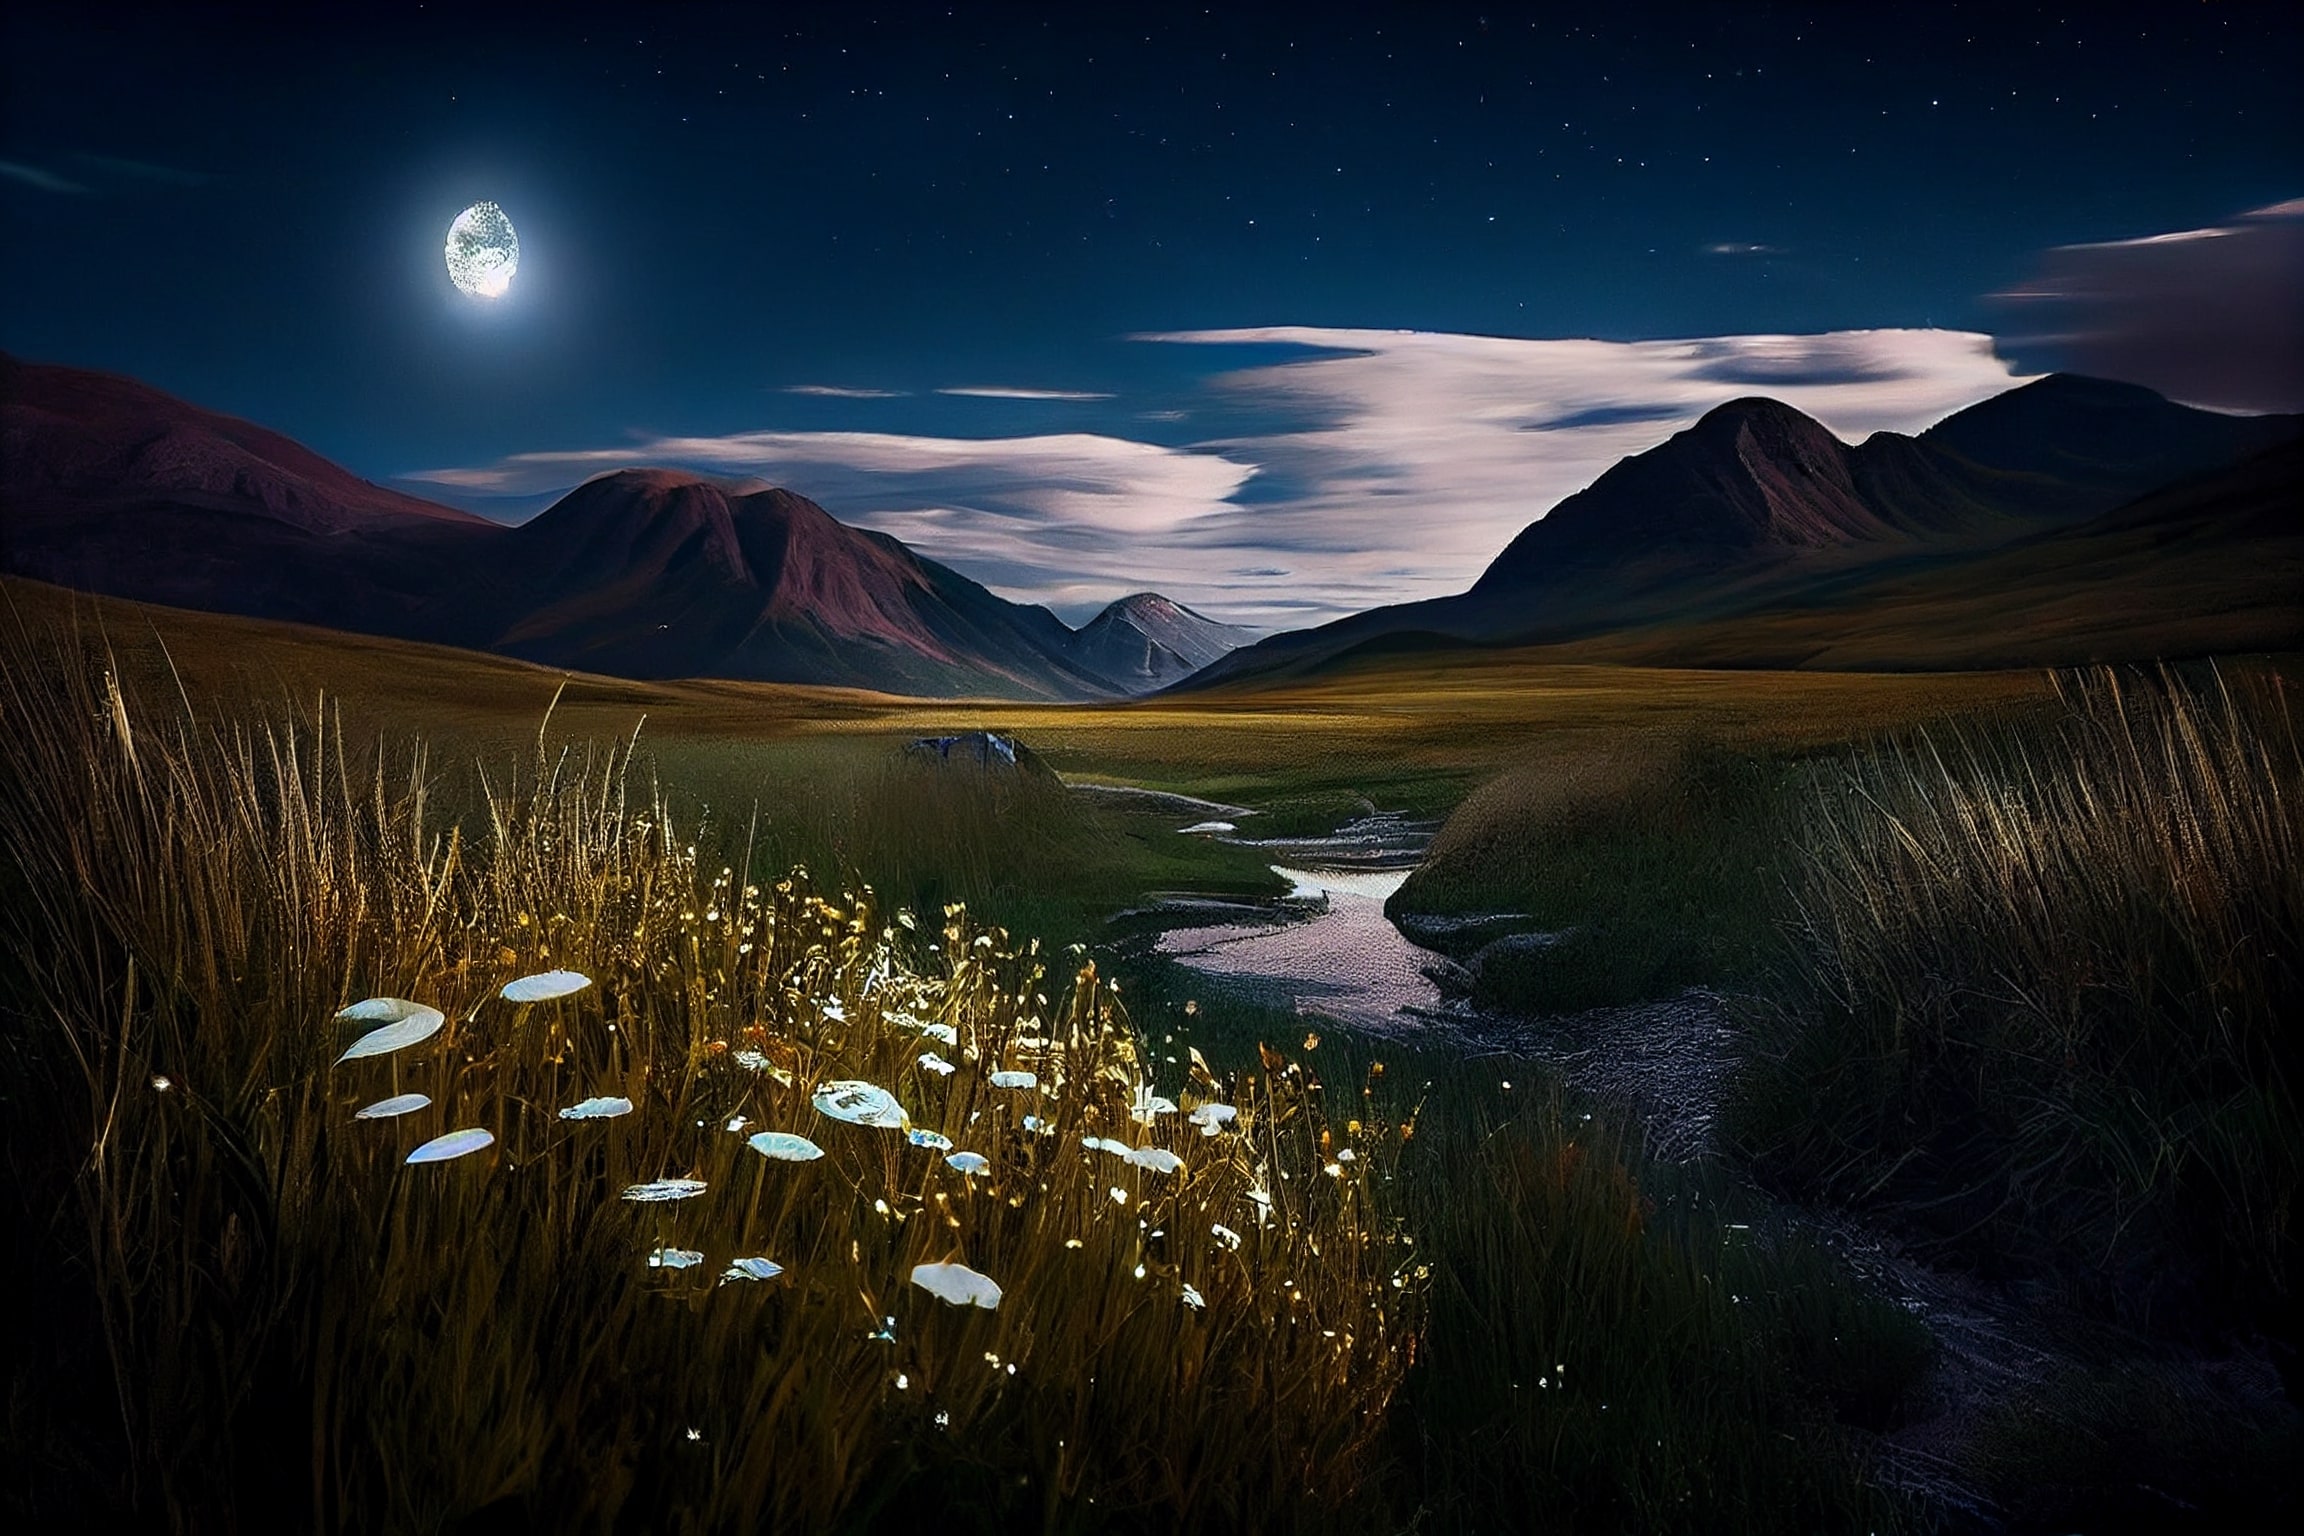 Painting of a night scene with mountains and a river.